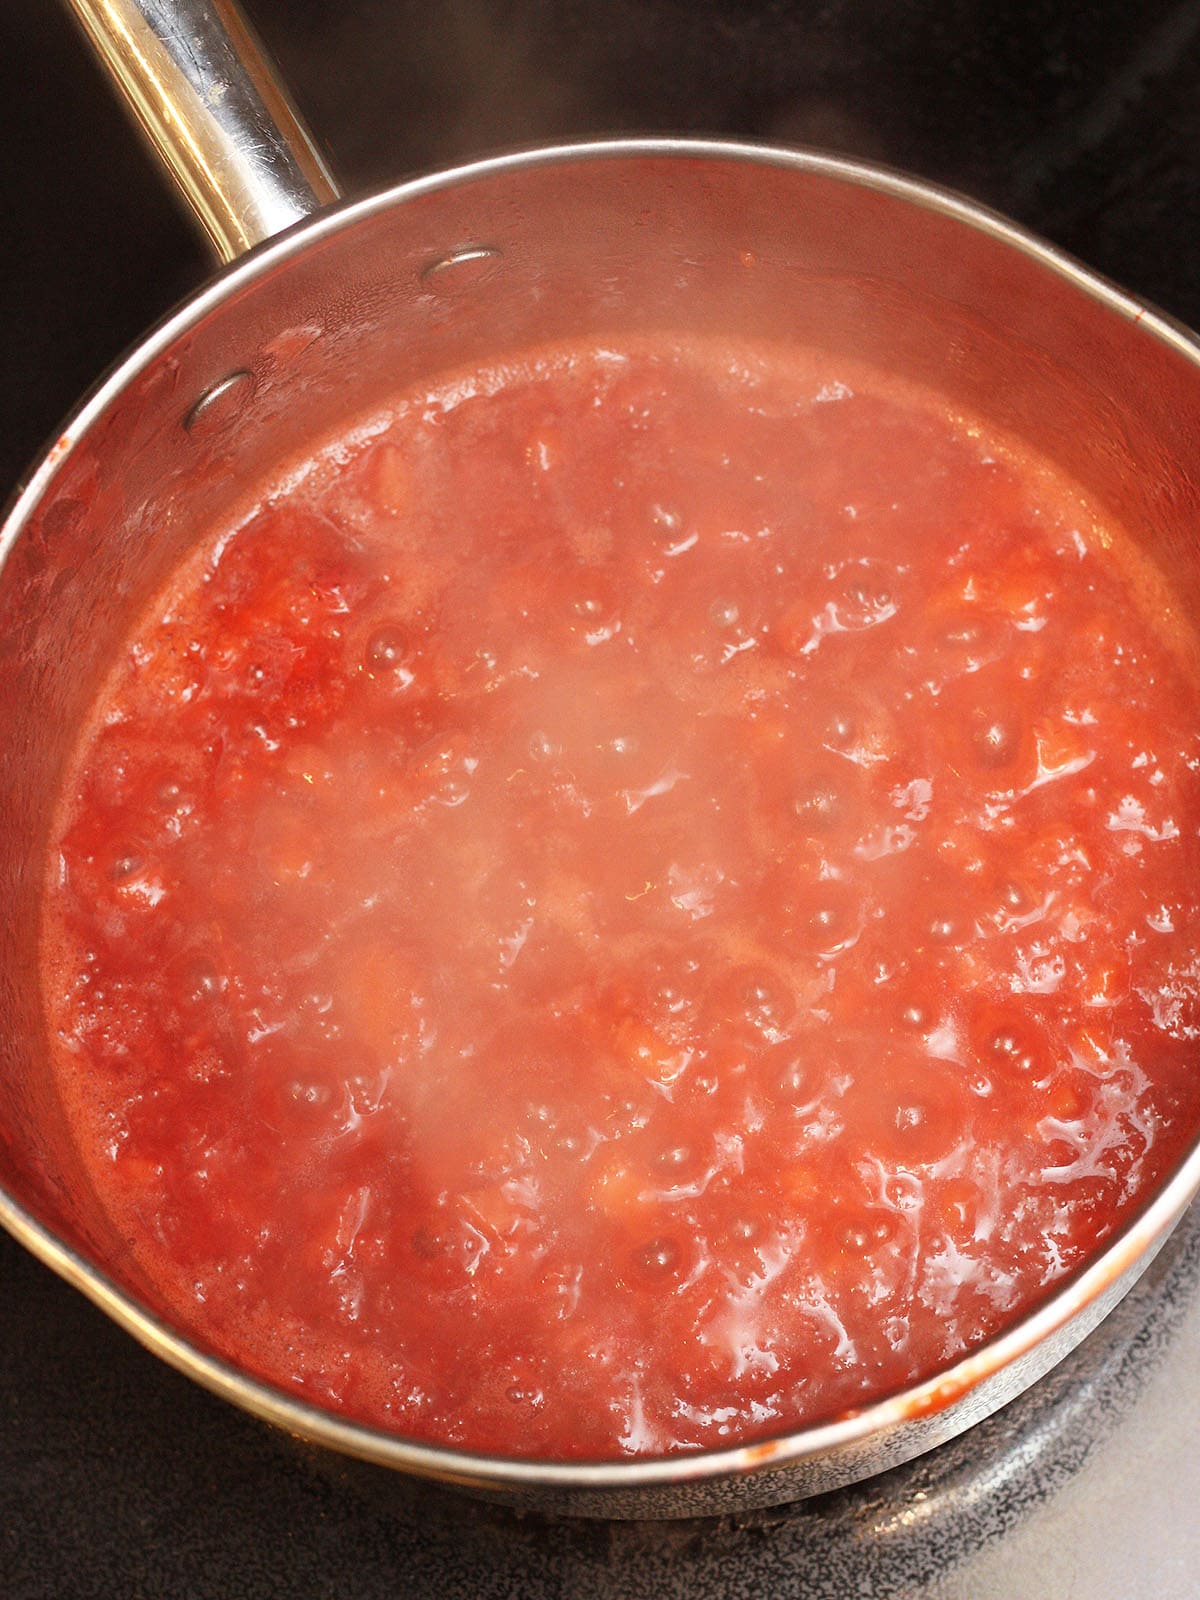 Homemade strawberry preserves at a full rolling boil in a metal saucepan.